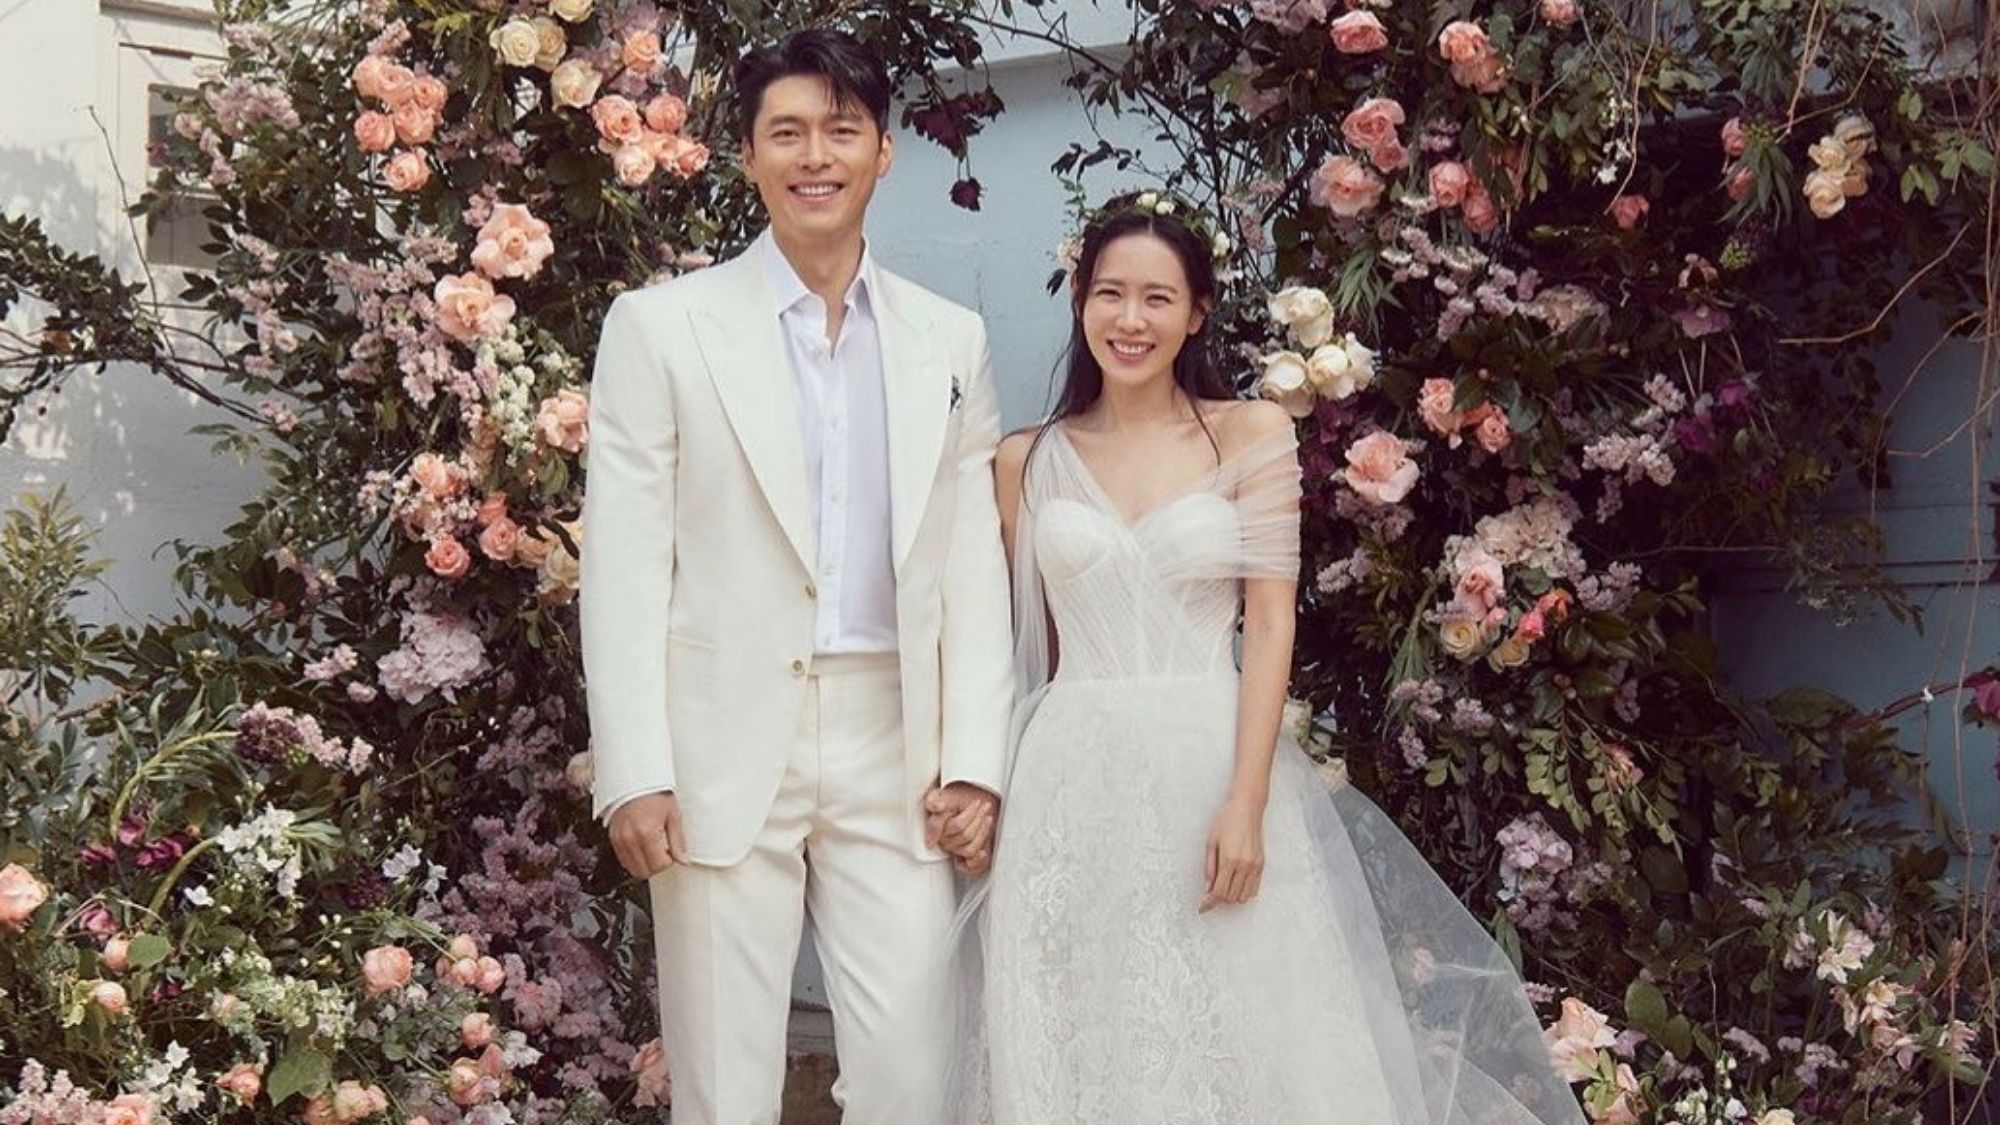 Son Yejin and Hyun Bin finally tied the knot photo @vast.ent